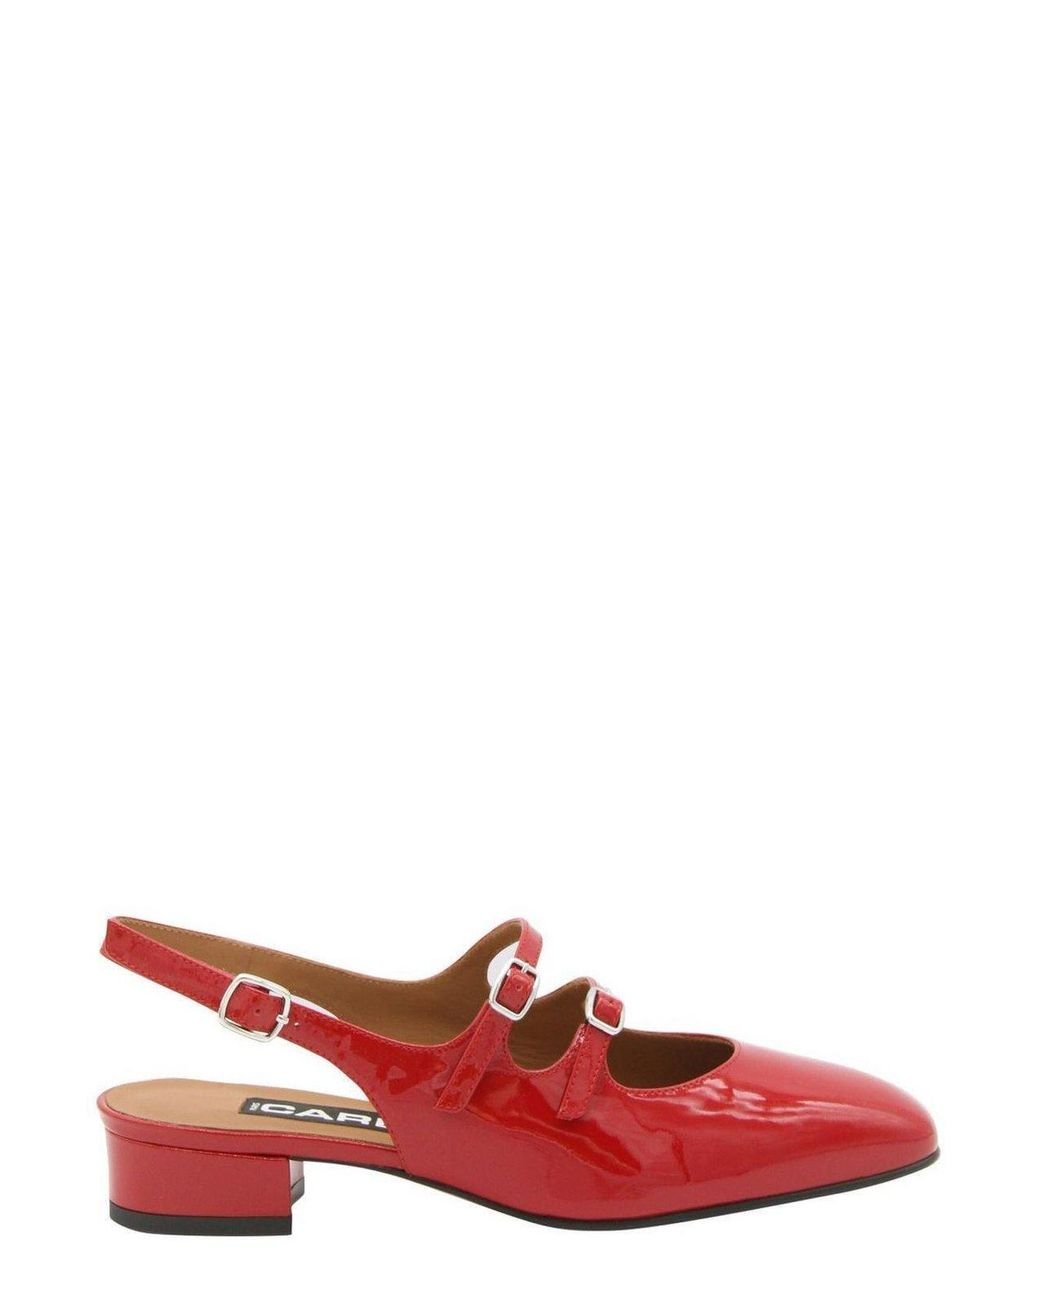 CAREL PARIS Peche Mary Jane Slingback Pumps in Red | Lyst